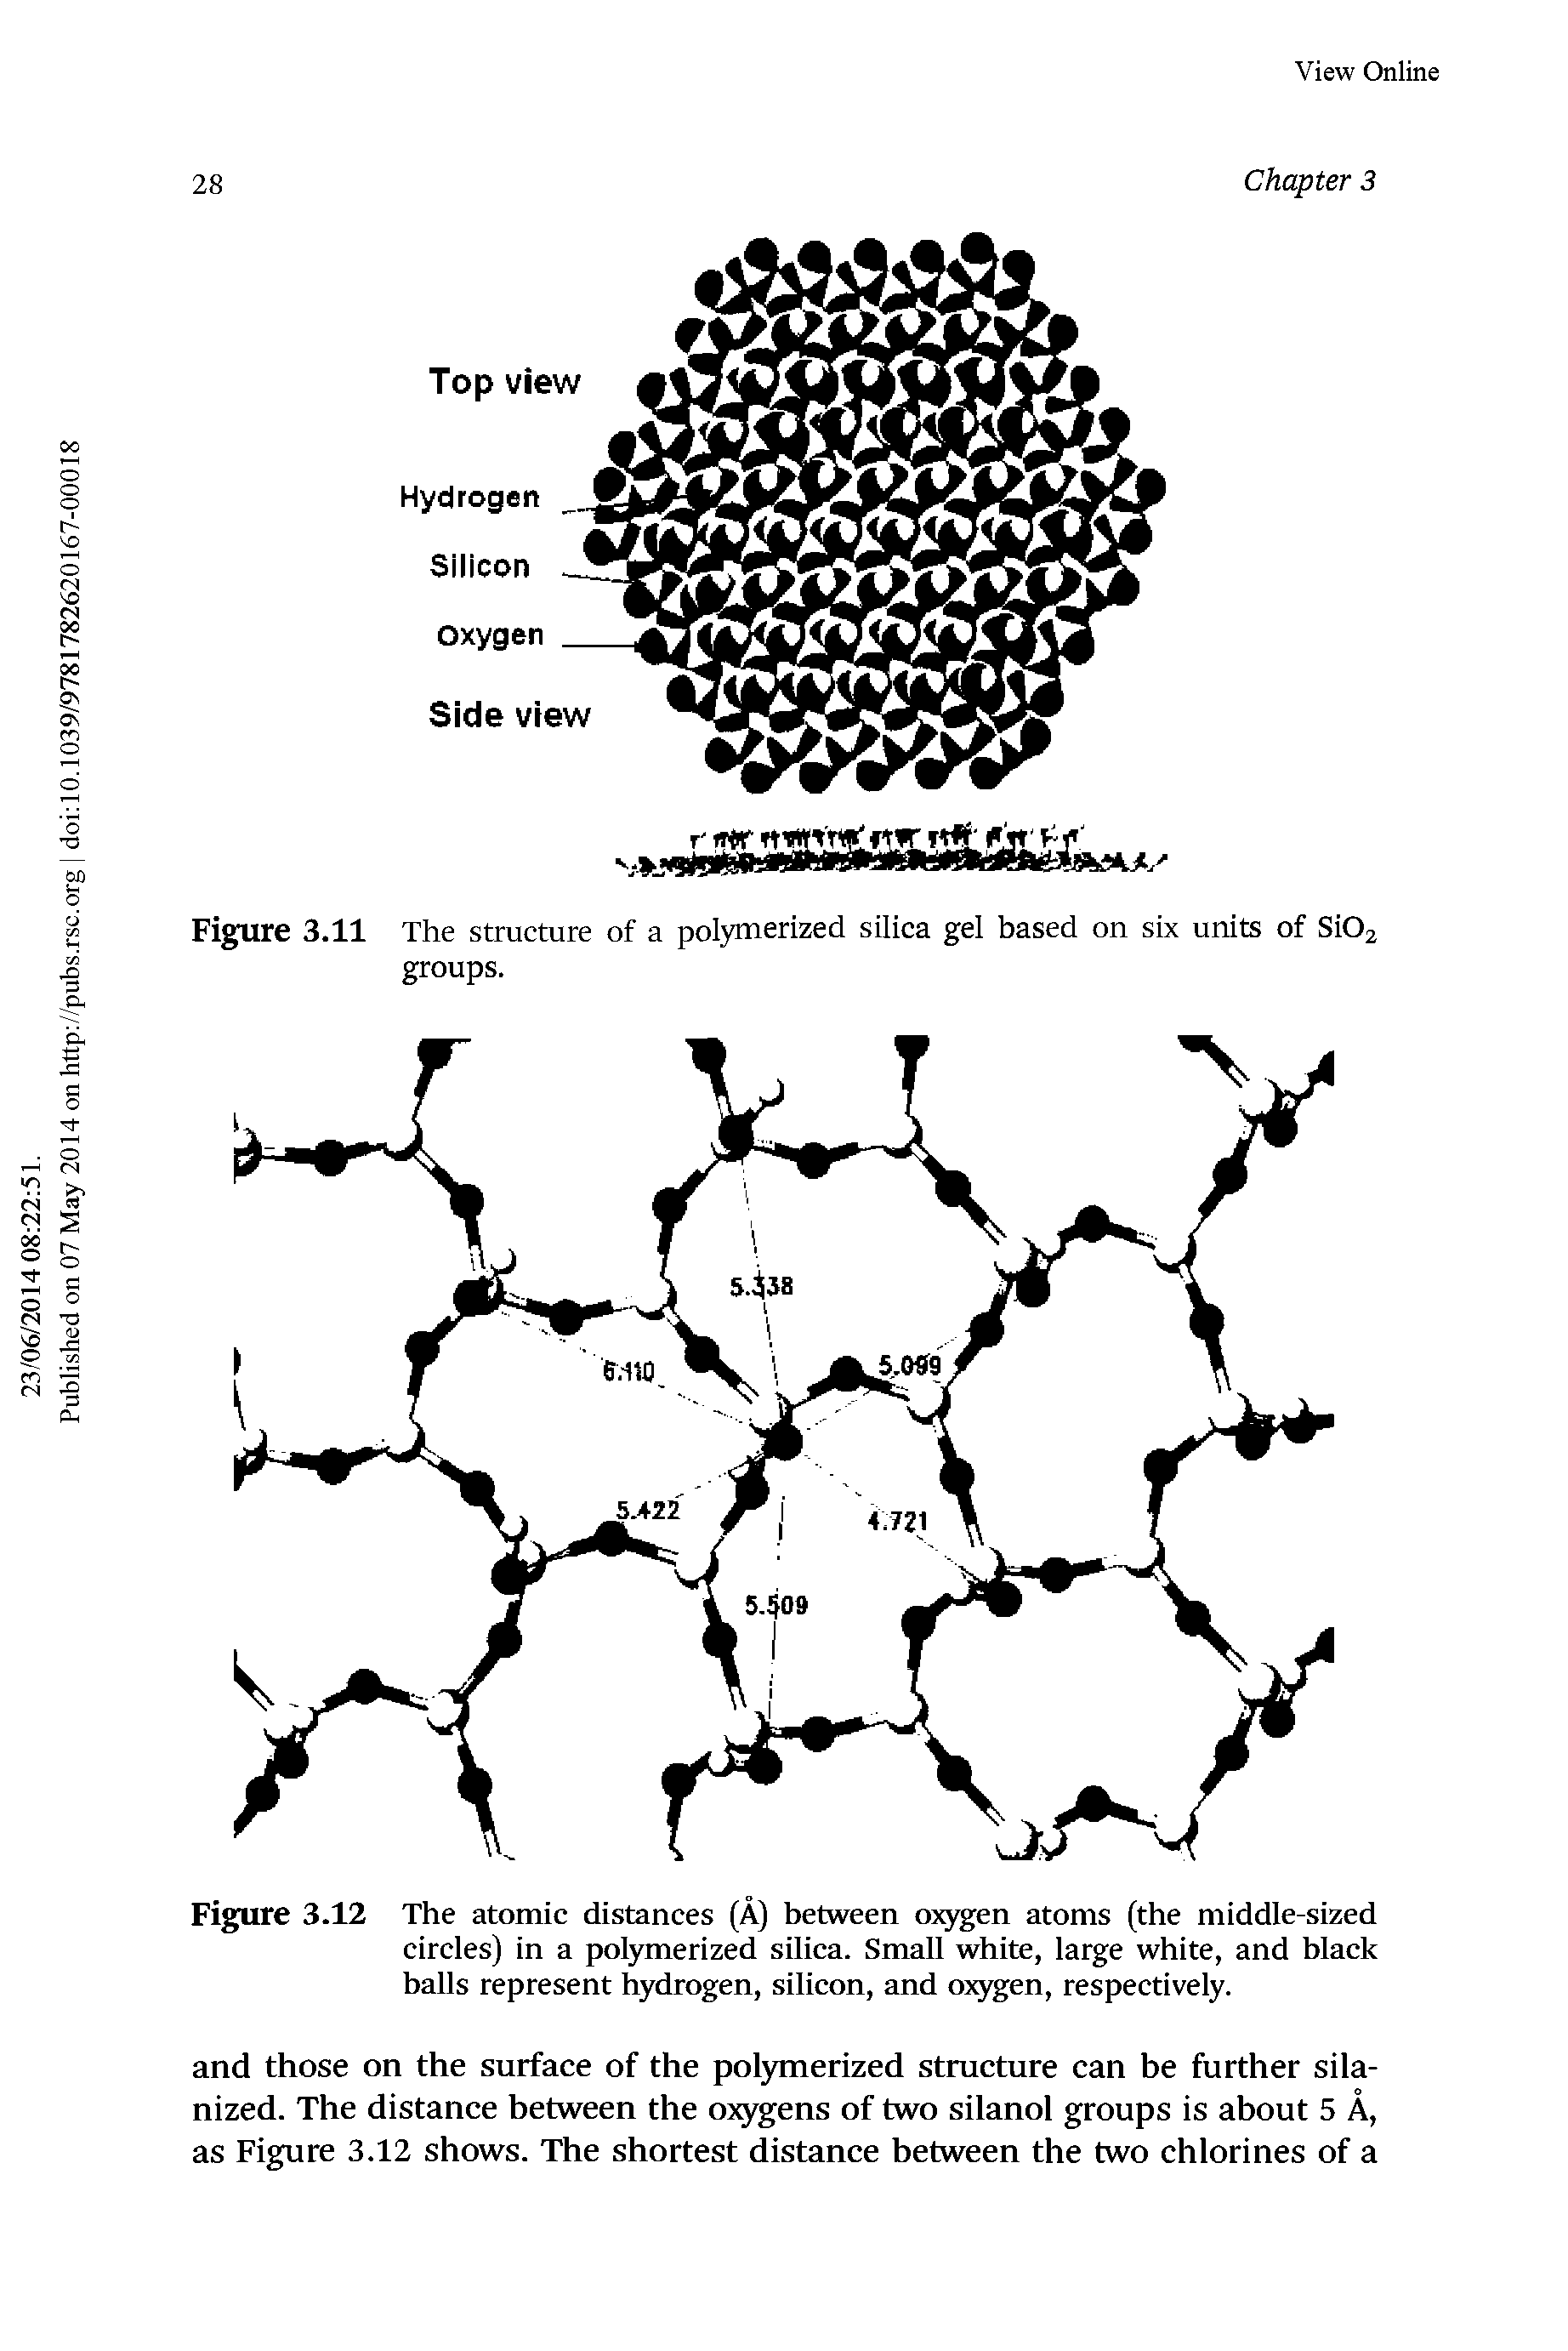 Figure 3.11 The structure of a polymerized silica gel based on six units of Si02 groups.